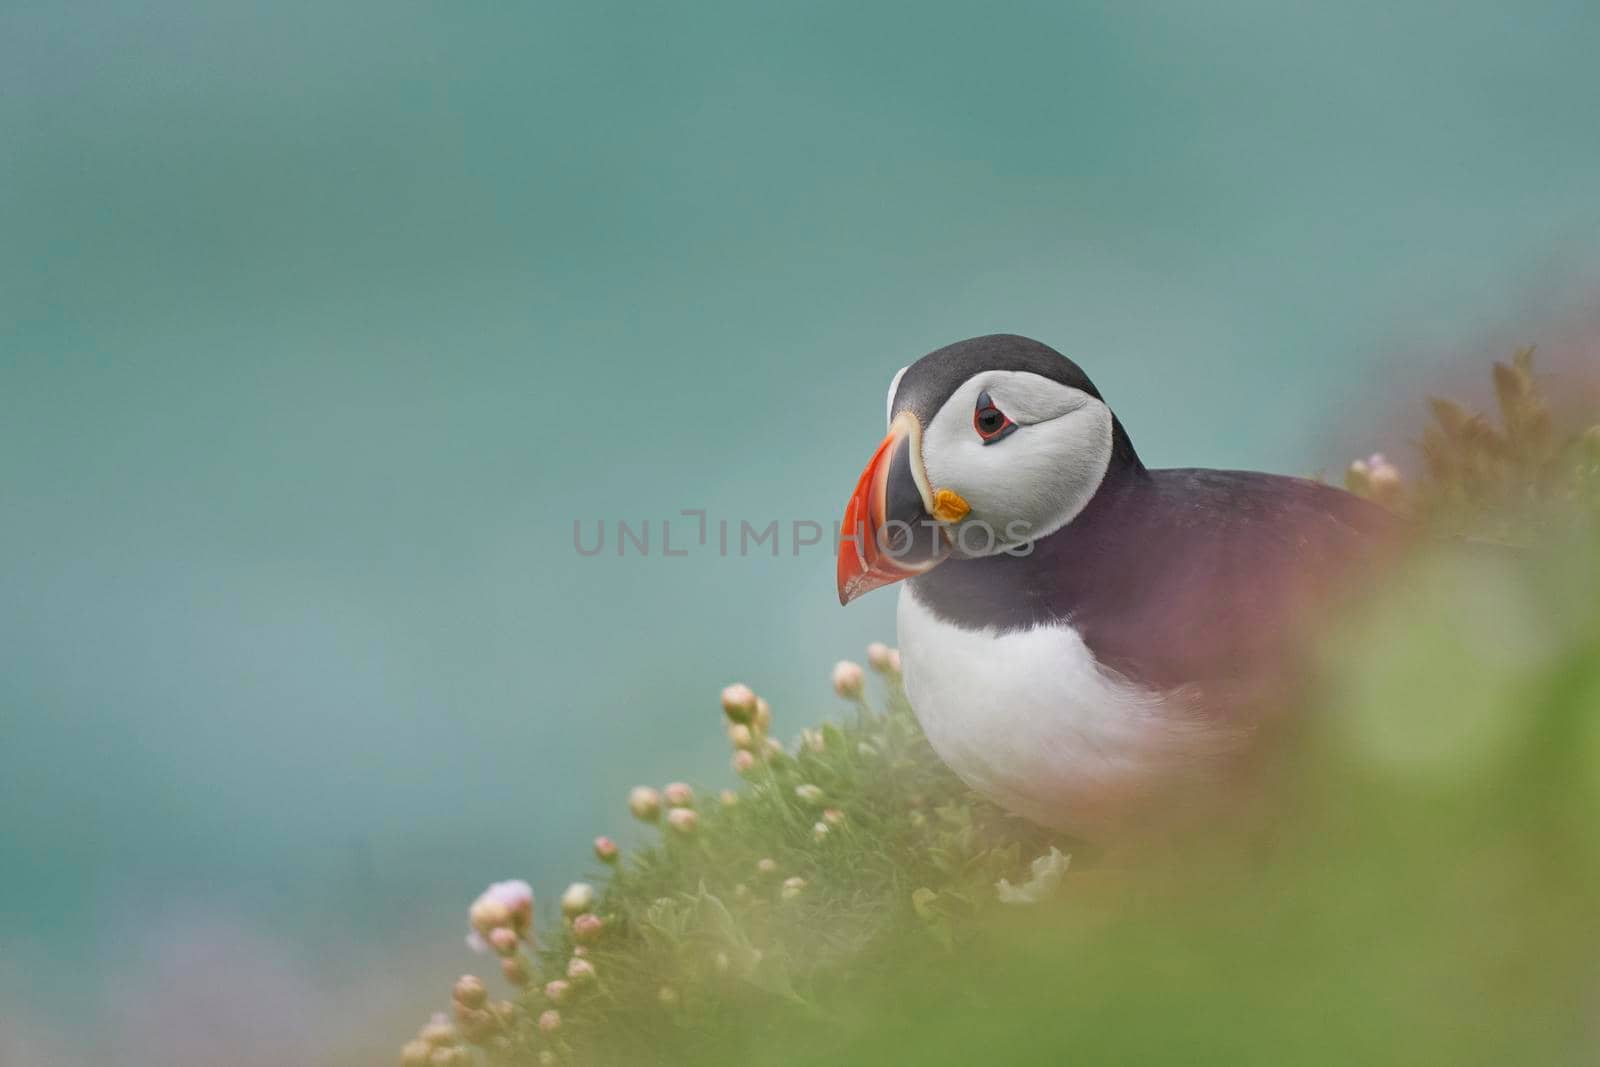 Atlantic puffin (Fratercula arctica) amongst spring flowers on a cliff on Great Saltee Island off the coast of Ireland.